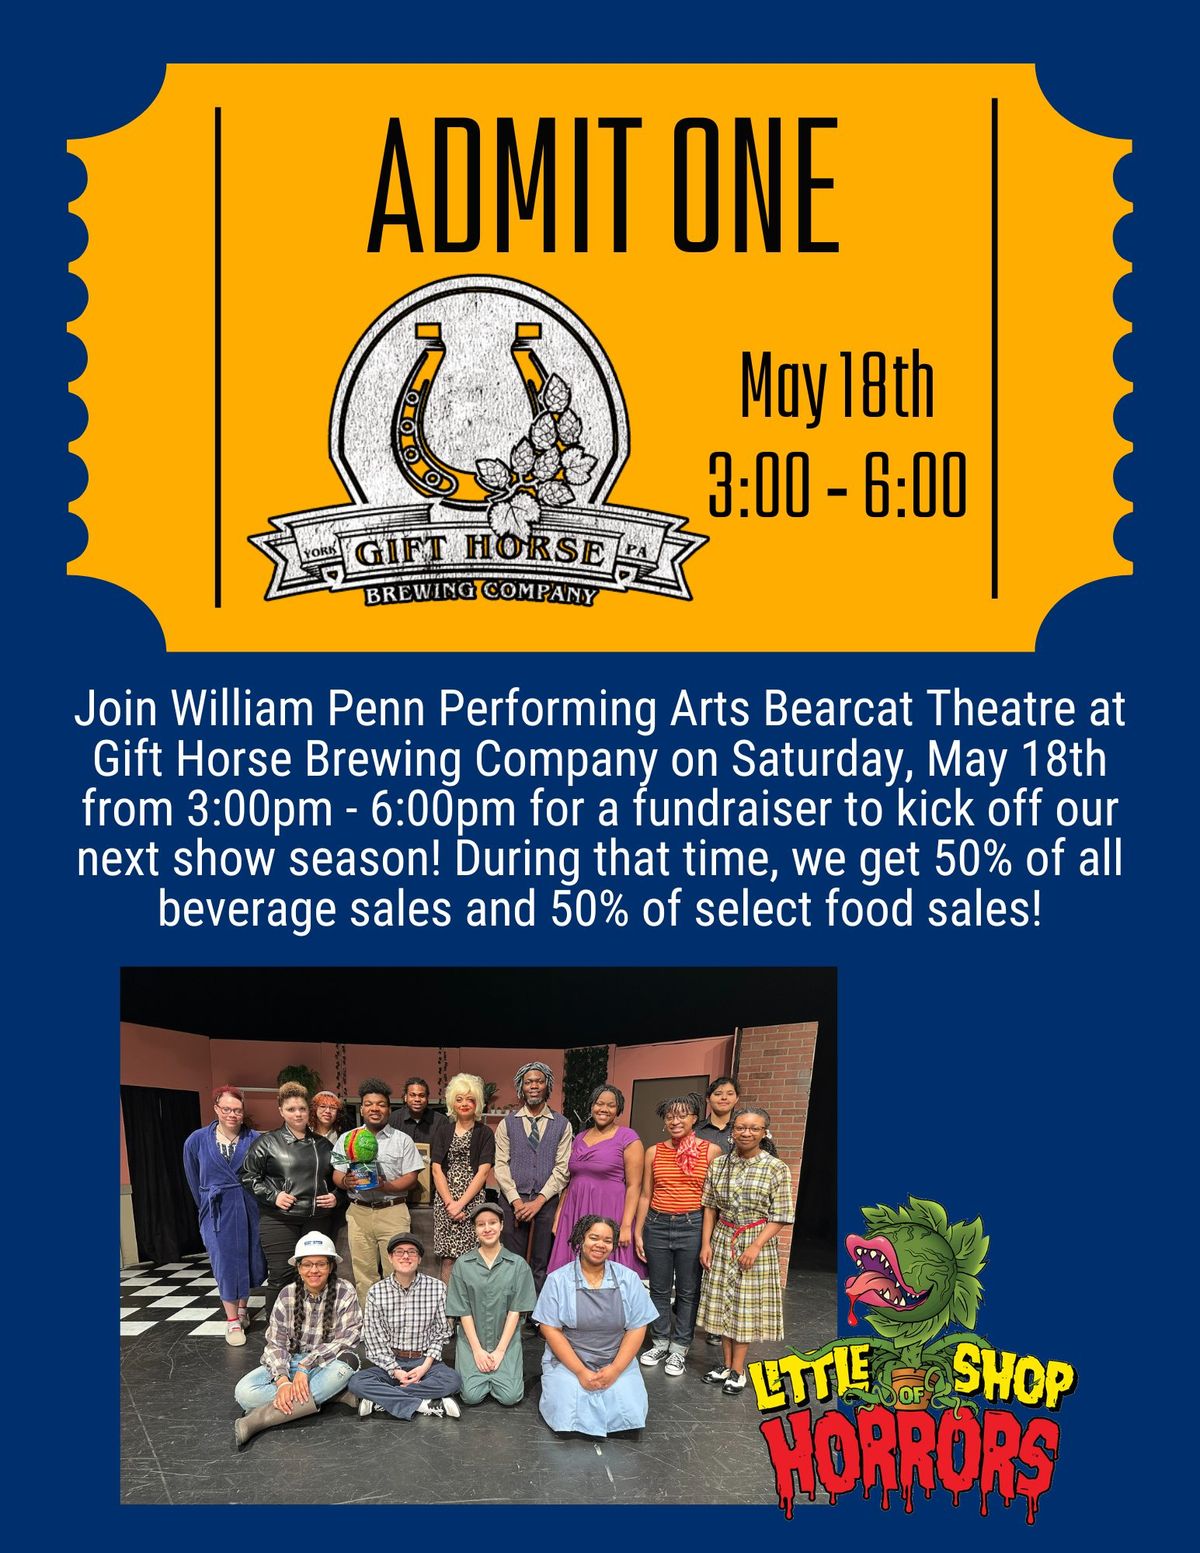 William Penn Performing Arts Fundraiser at Gift Horse Brewing Company